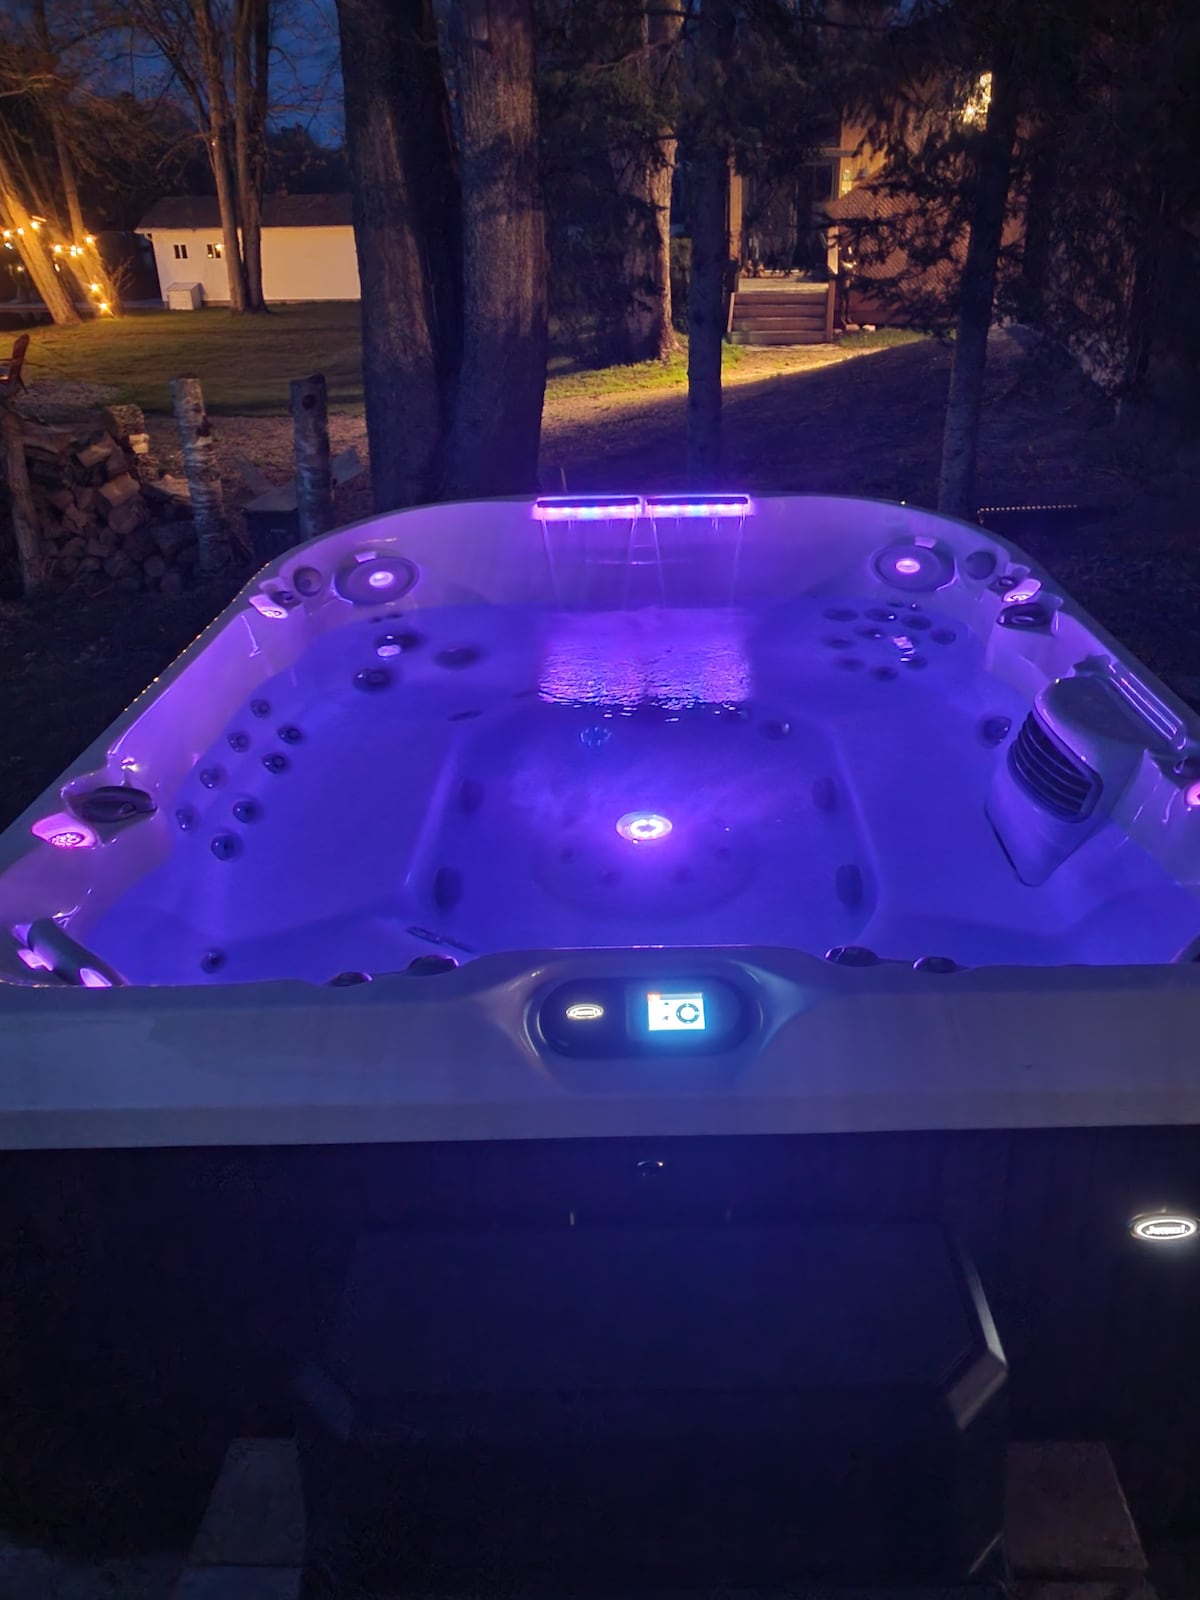 Gatherings River House - New Hot Tub!